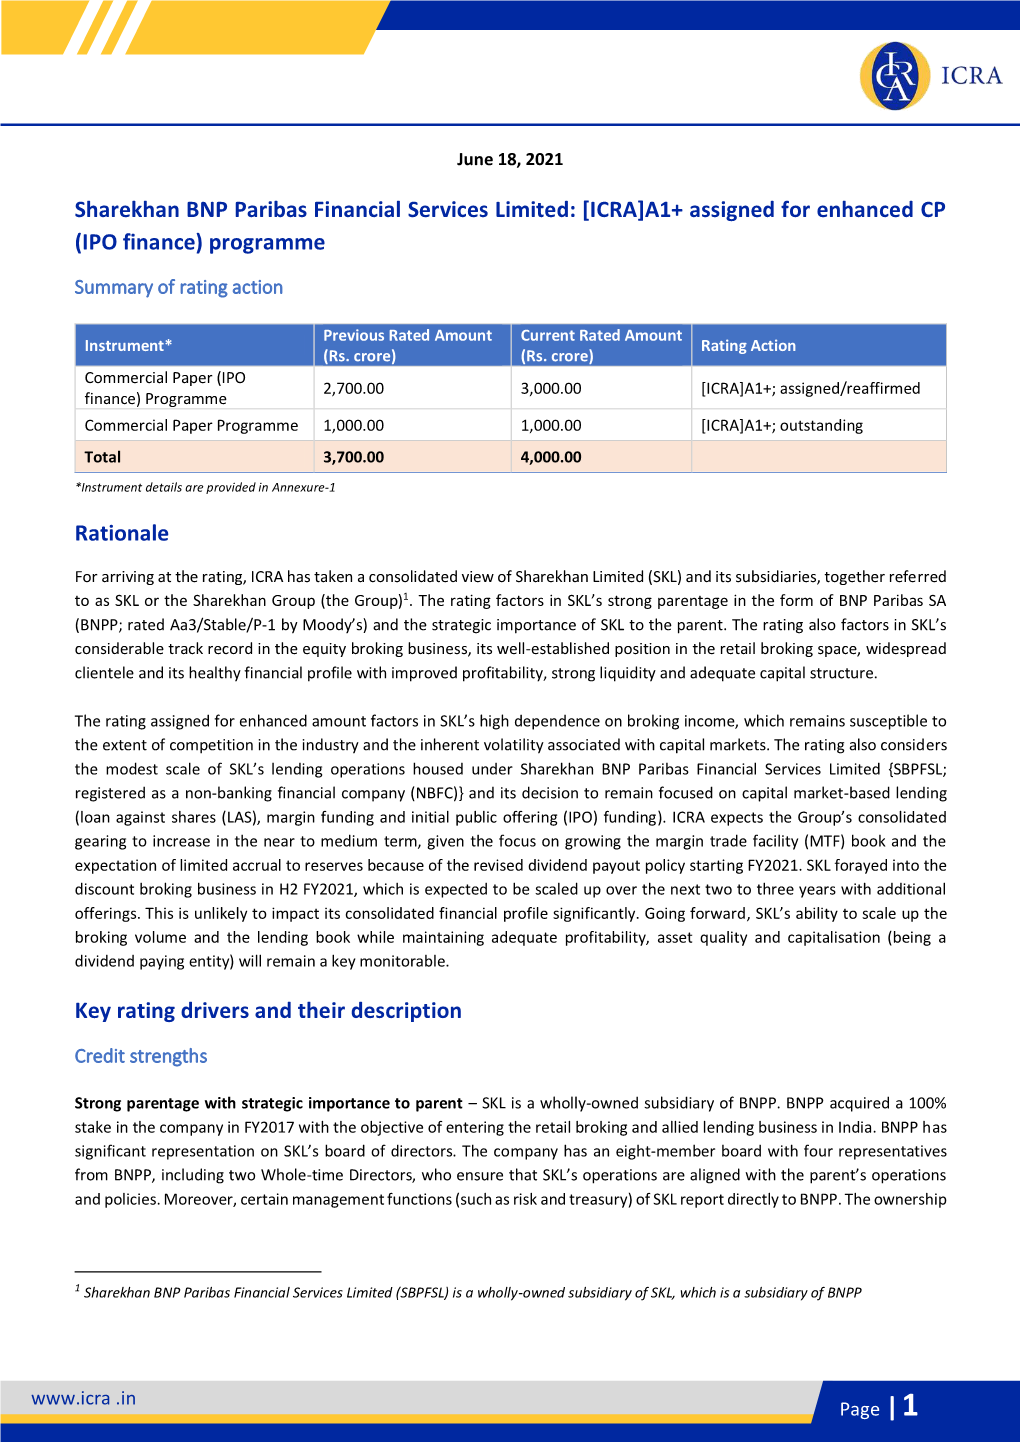 Sharekhan BNP Paribas Financial Services Limited: [ICRA]A1+ Assigned for Enhanced CP (IPO Finance) Programme Rationale Key Ratin